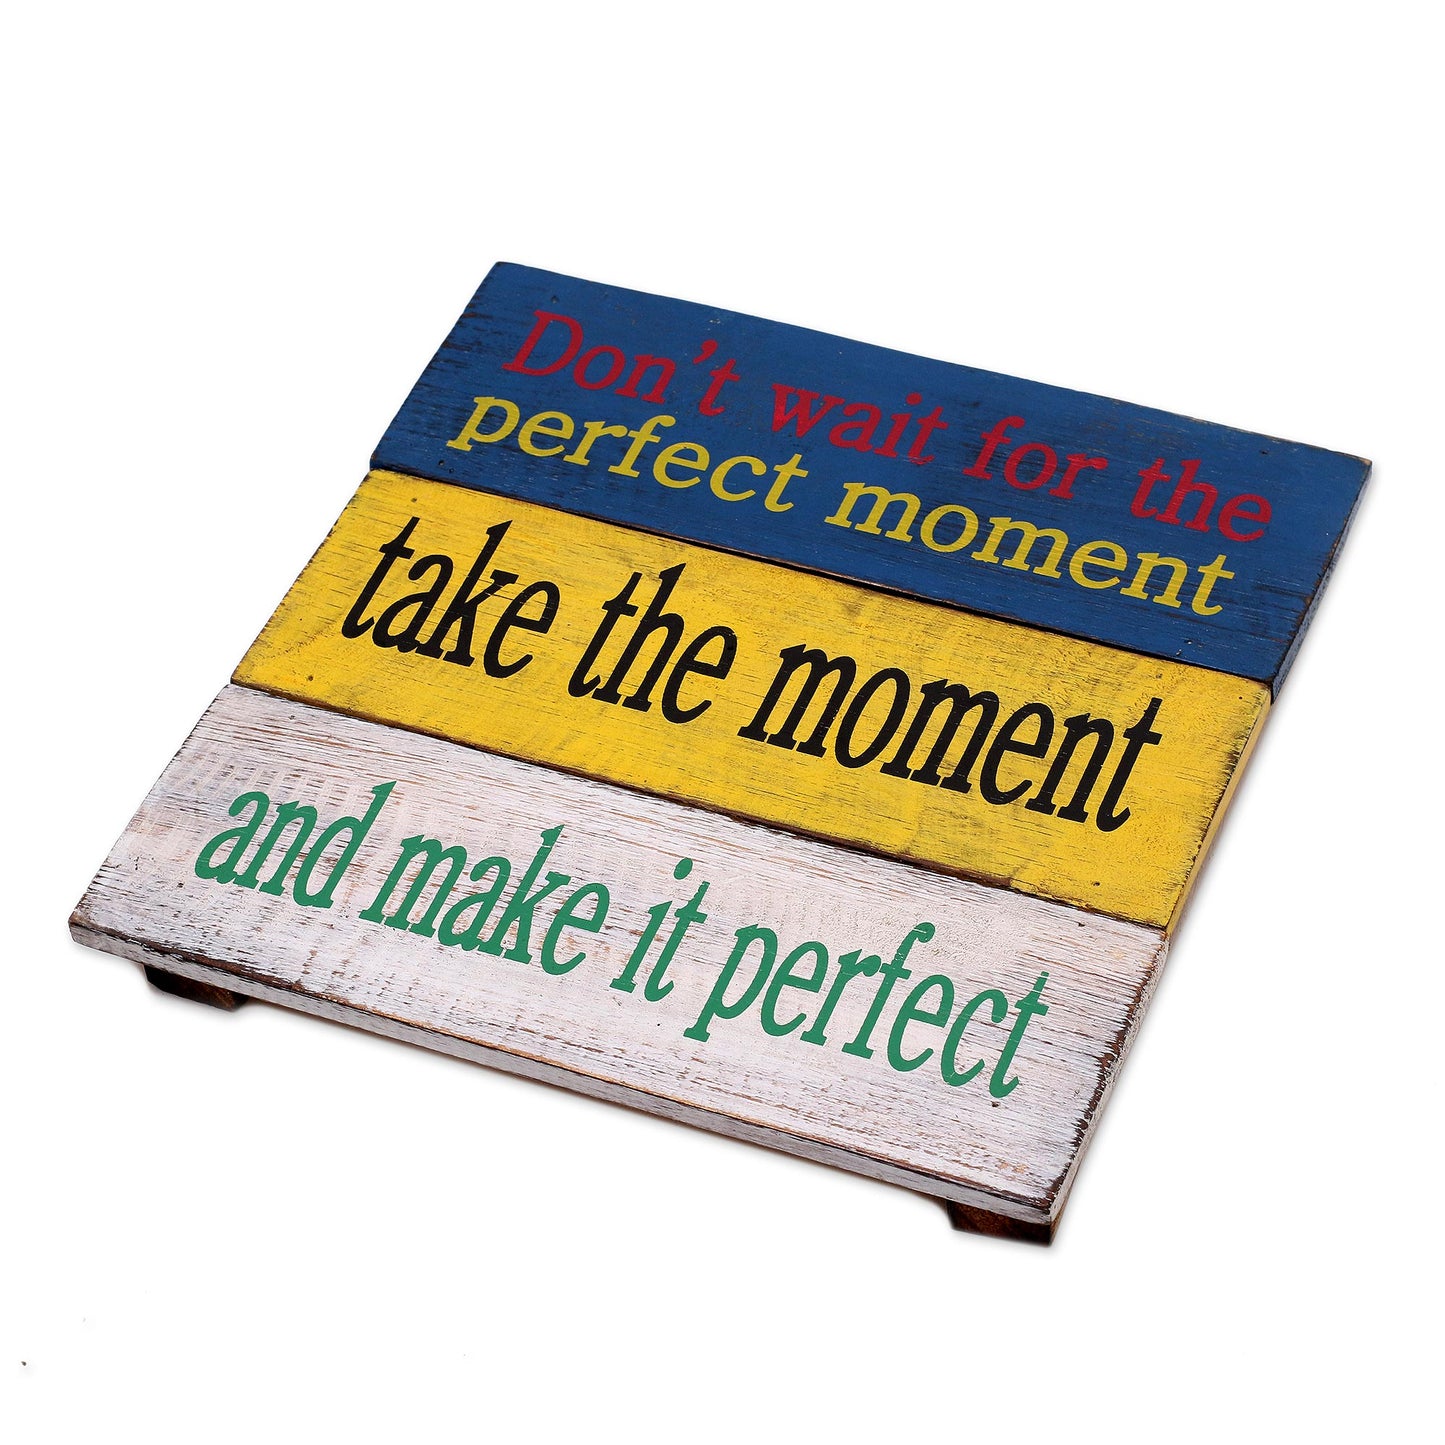 Perfect Moment Antique Finish Wood Wall Hanging Decorative Sign Indonesia